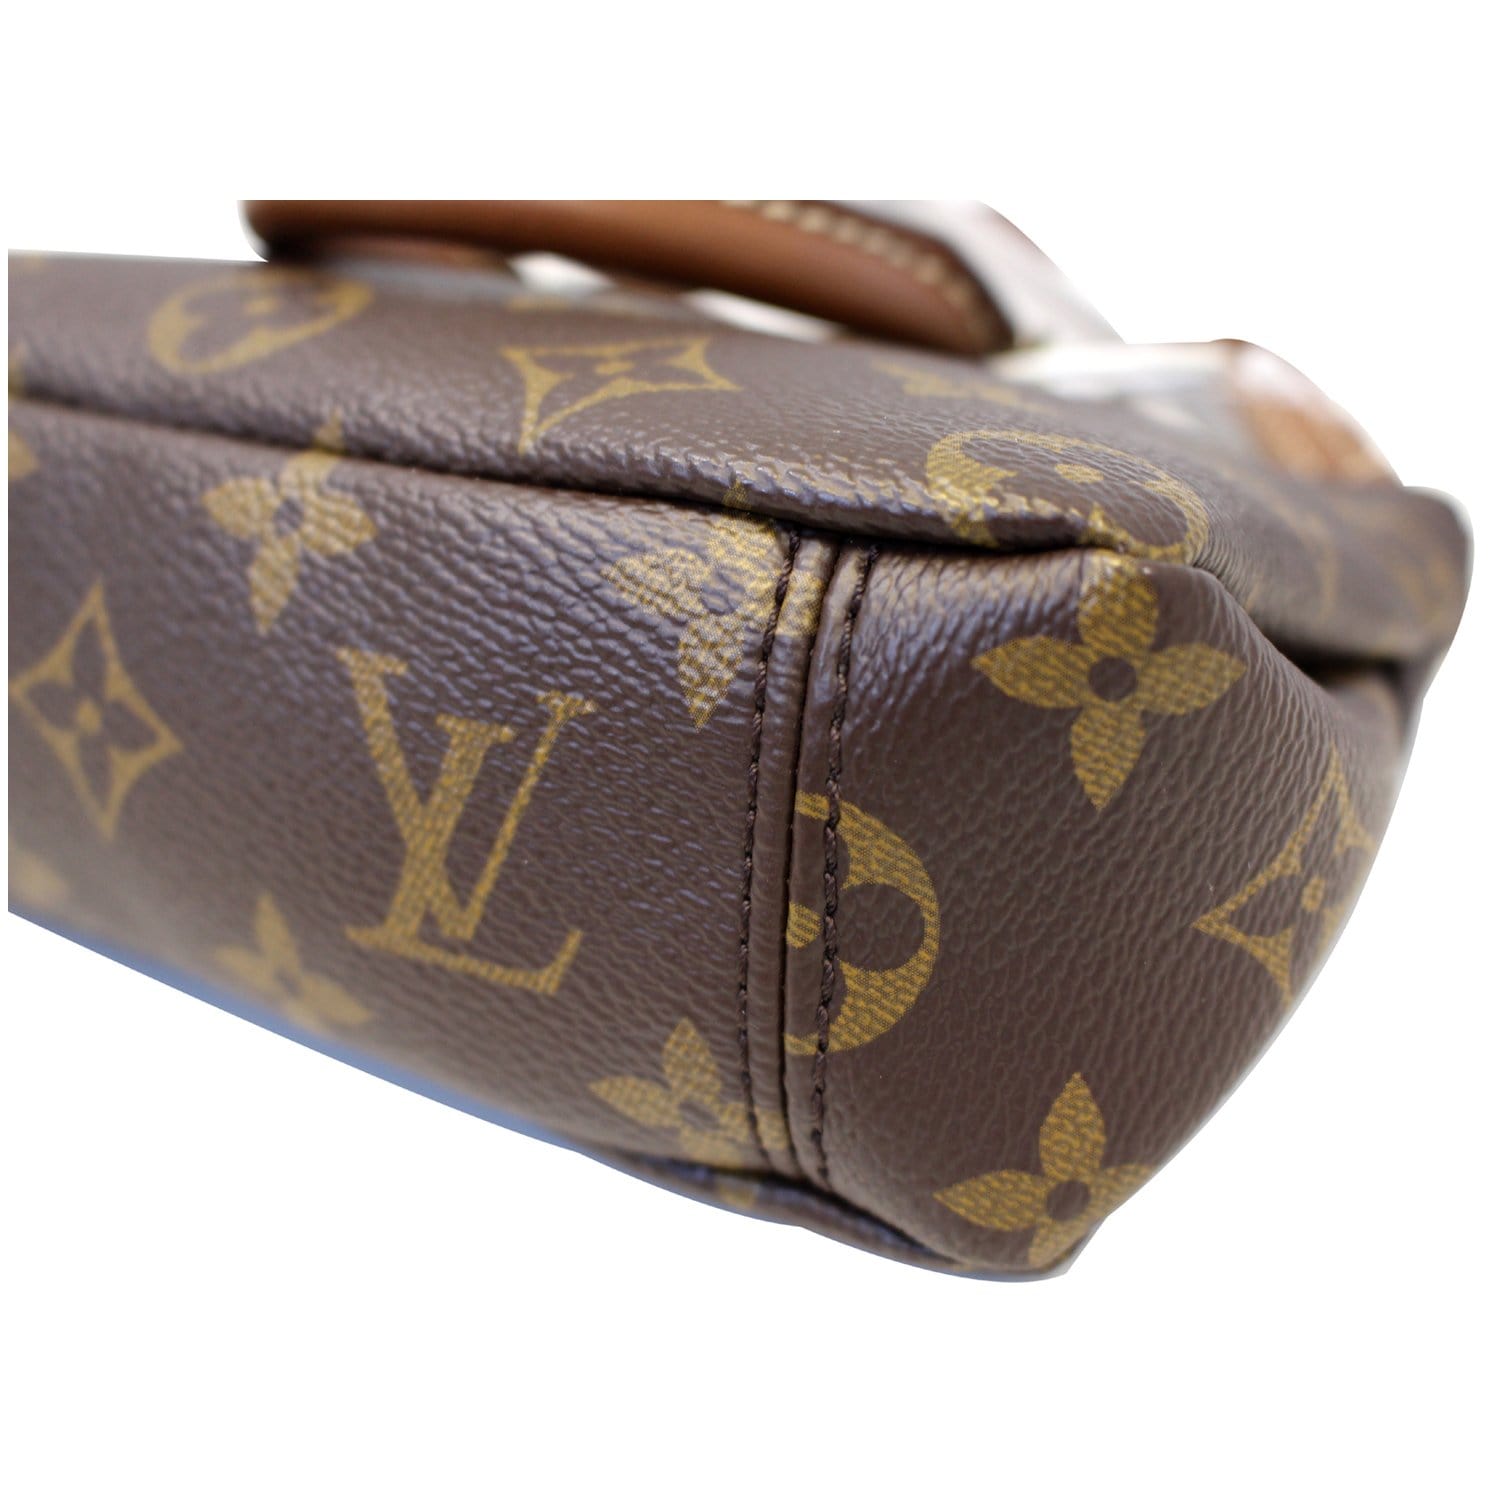 Why I returned the Louis Vuitton Nano Turenne and Pallas Crossbody 